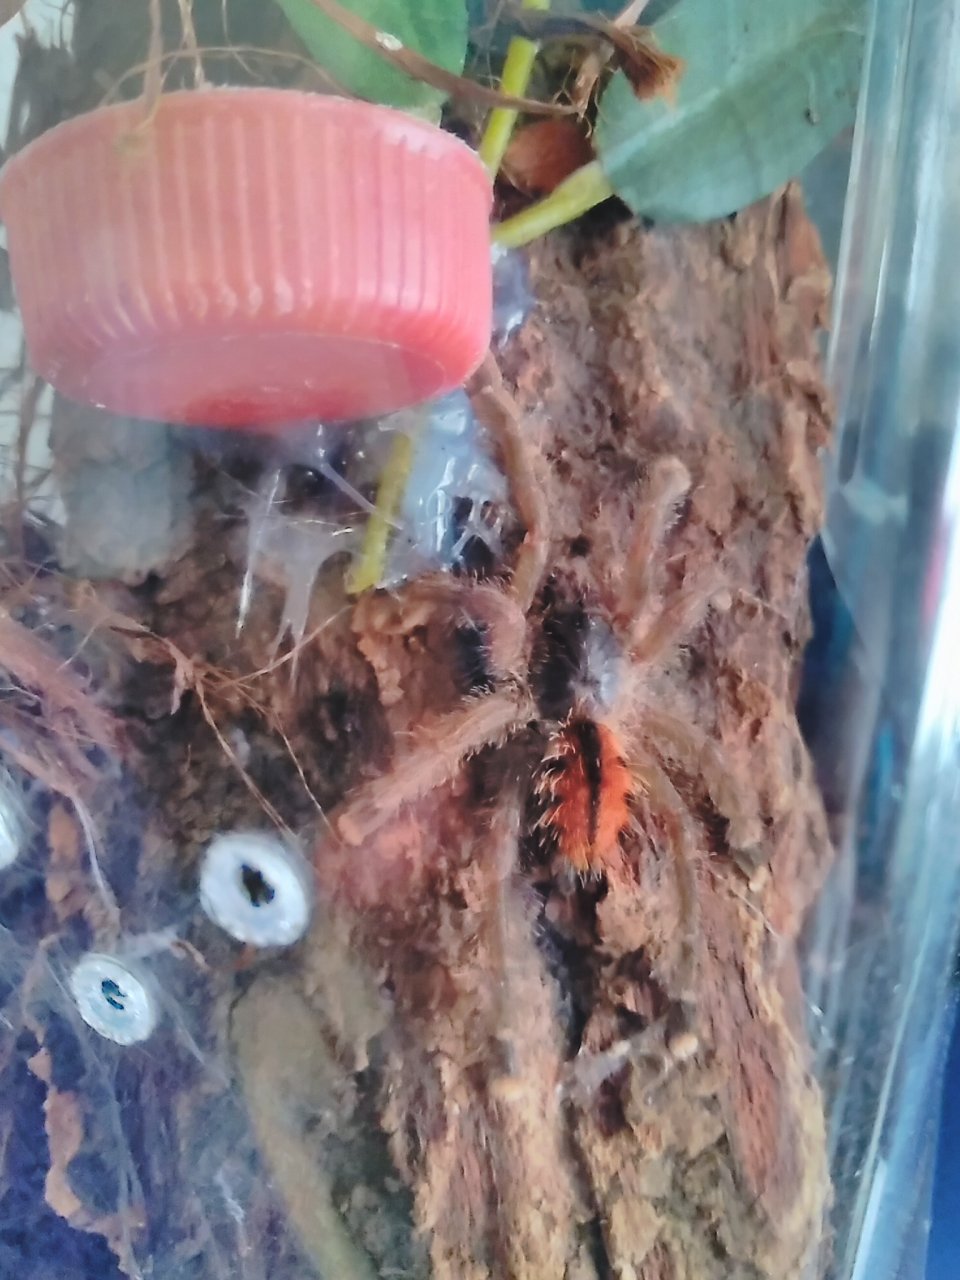 A. avicularia sling